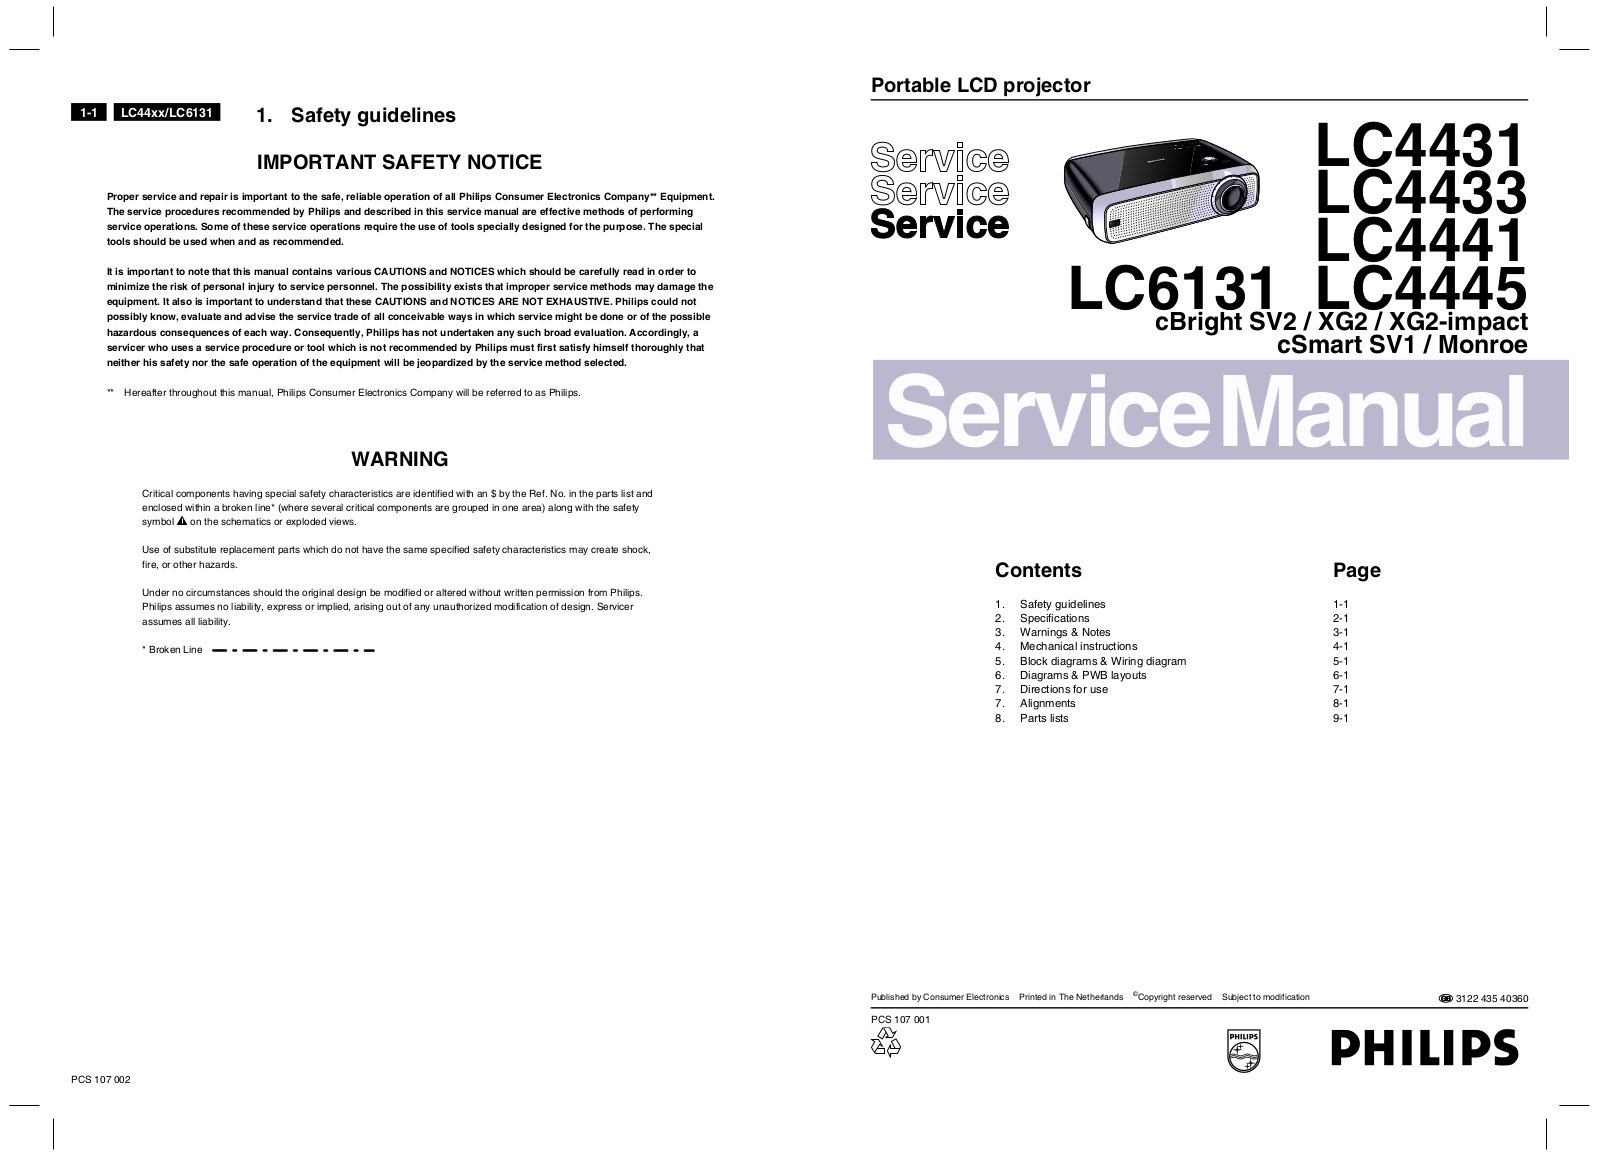 Philips LC4431, LC-4433, LC-4441, LC-4445, LC-6131 Service Manual